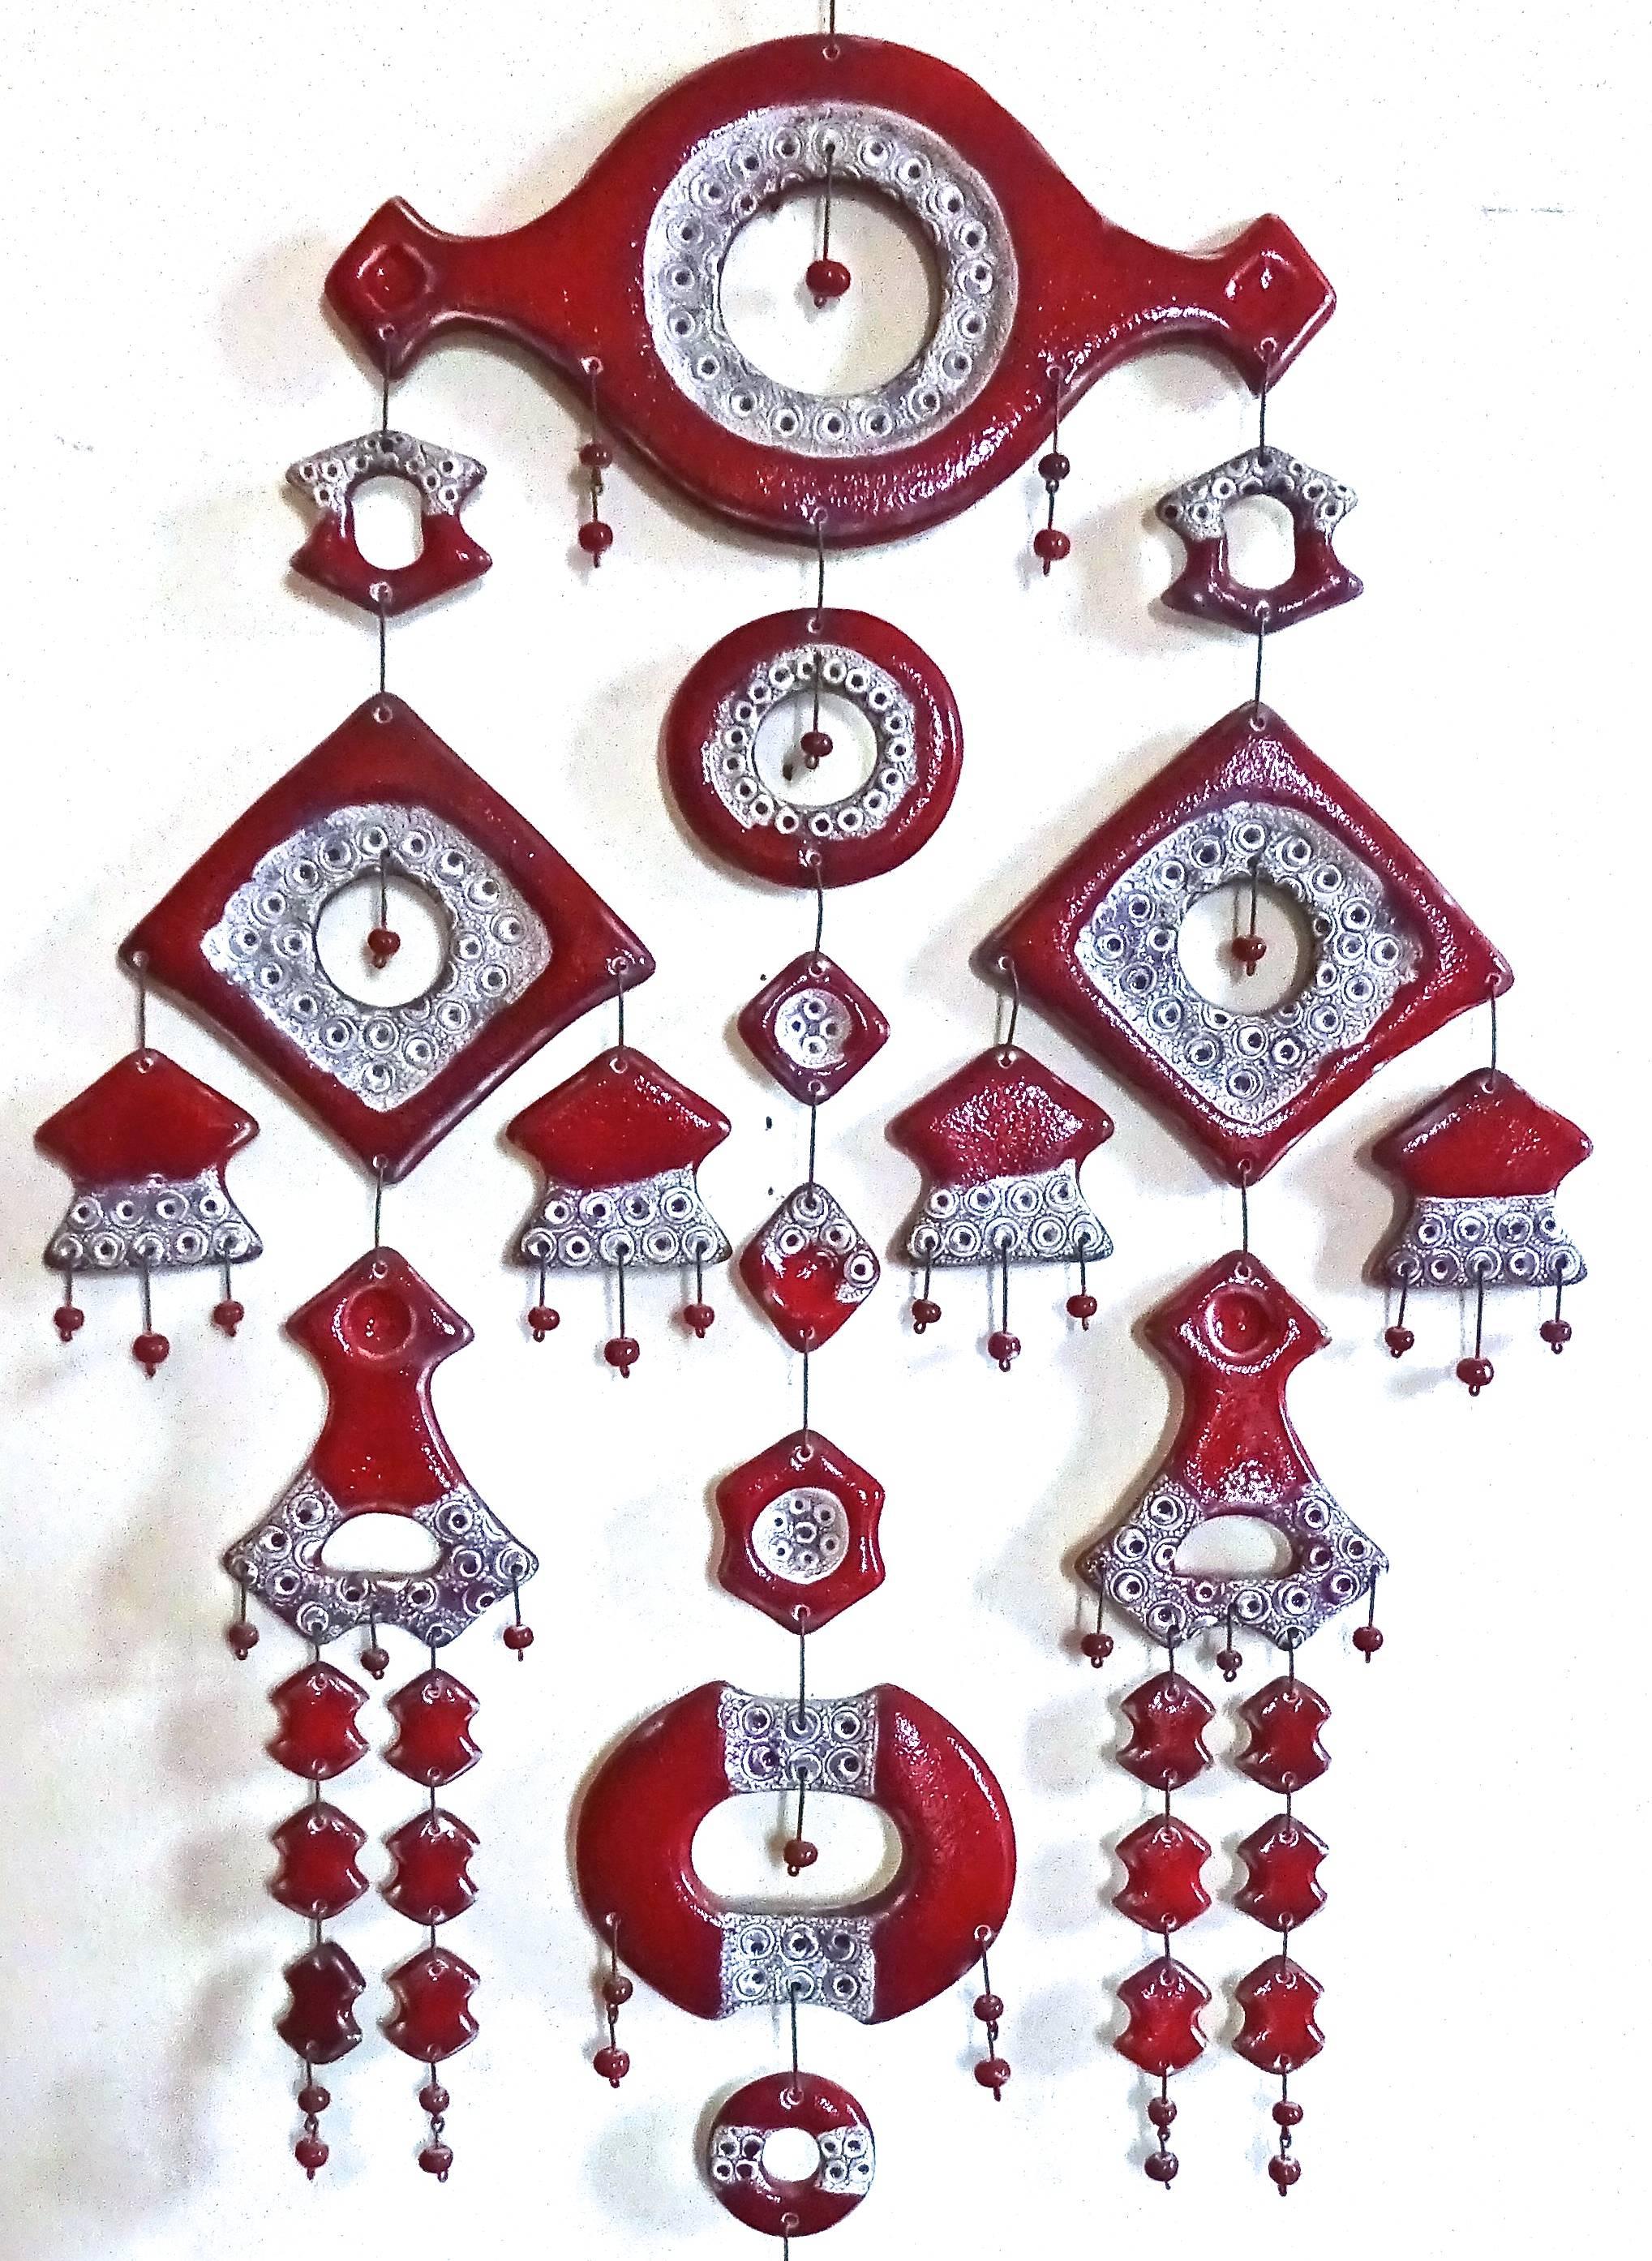 Wonderful and unusual art pottery hanging wall sculpture, made in Denmark in the late 1960's. This piece features 108 individual handmade pieces, done in a red flambé glaze with incised details in black and white. They are hand assembled with steel